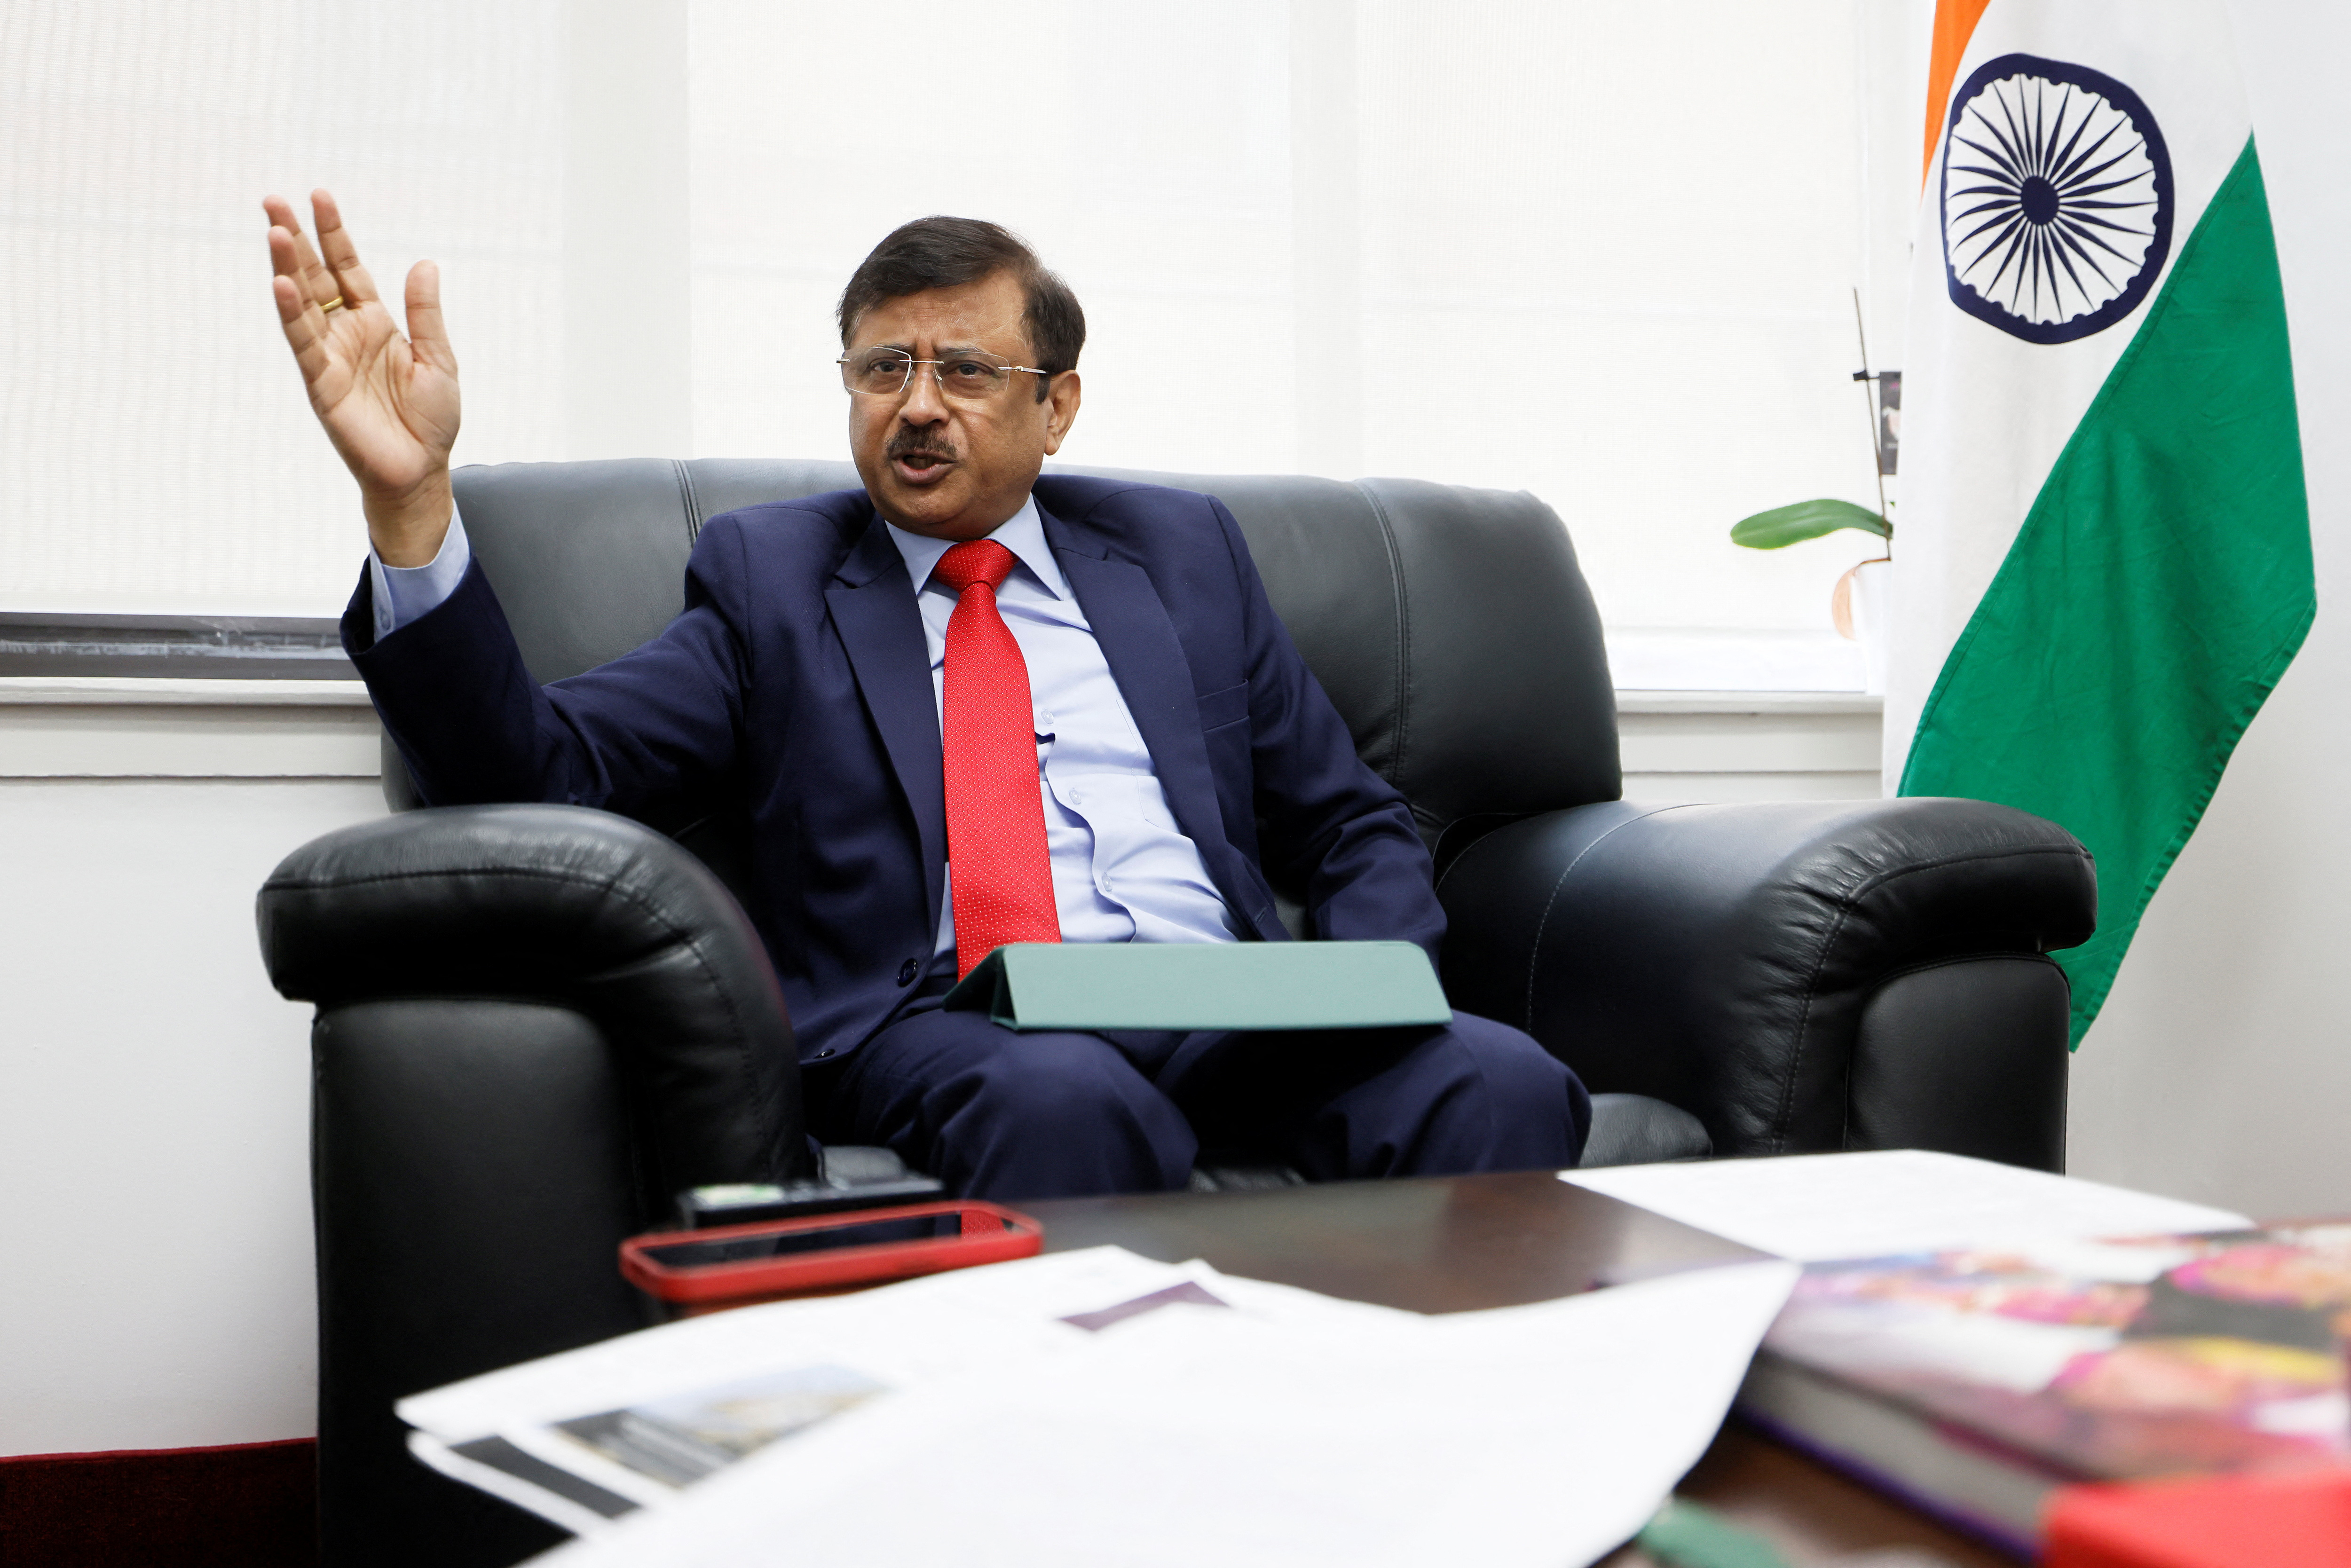 High Commissioner of India to Canada Sanjay Kumar Verma speaks during an interview in Ottawa